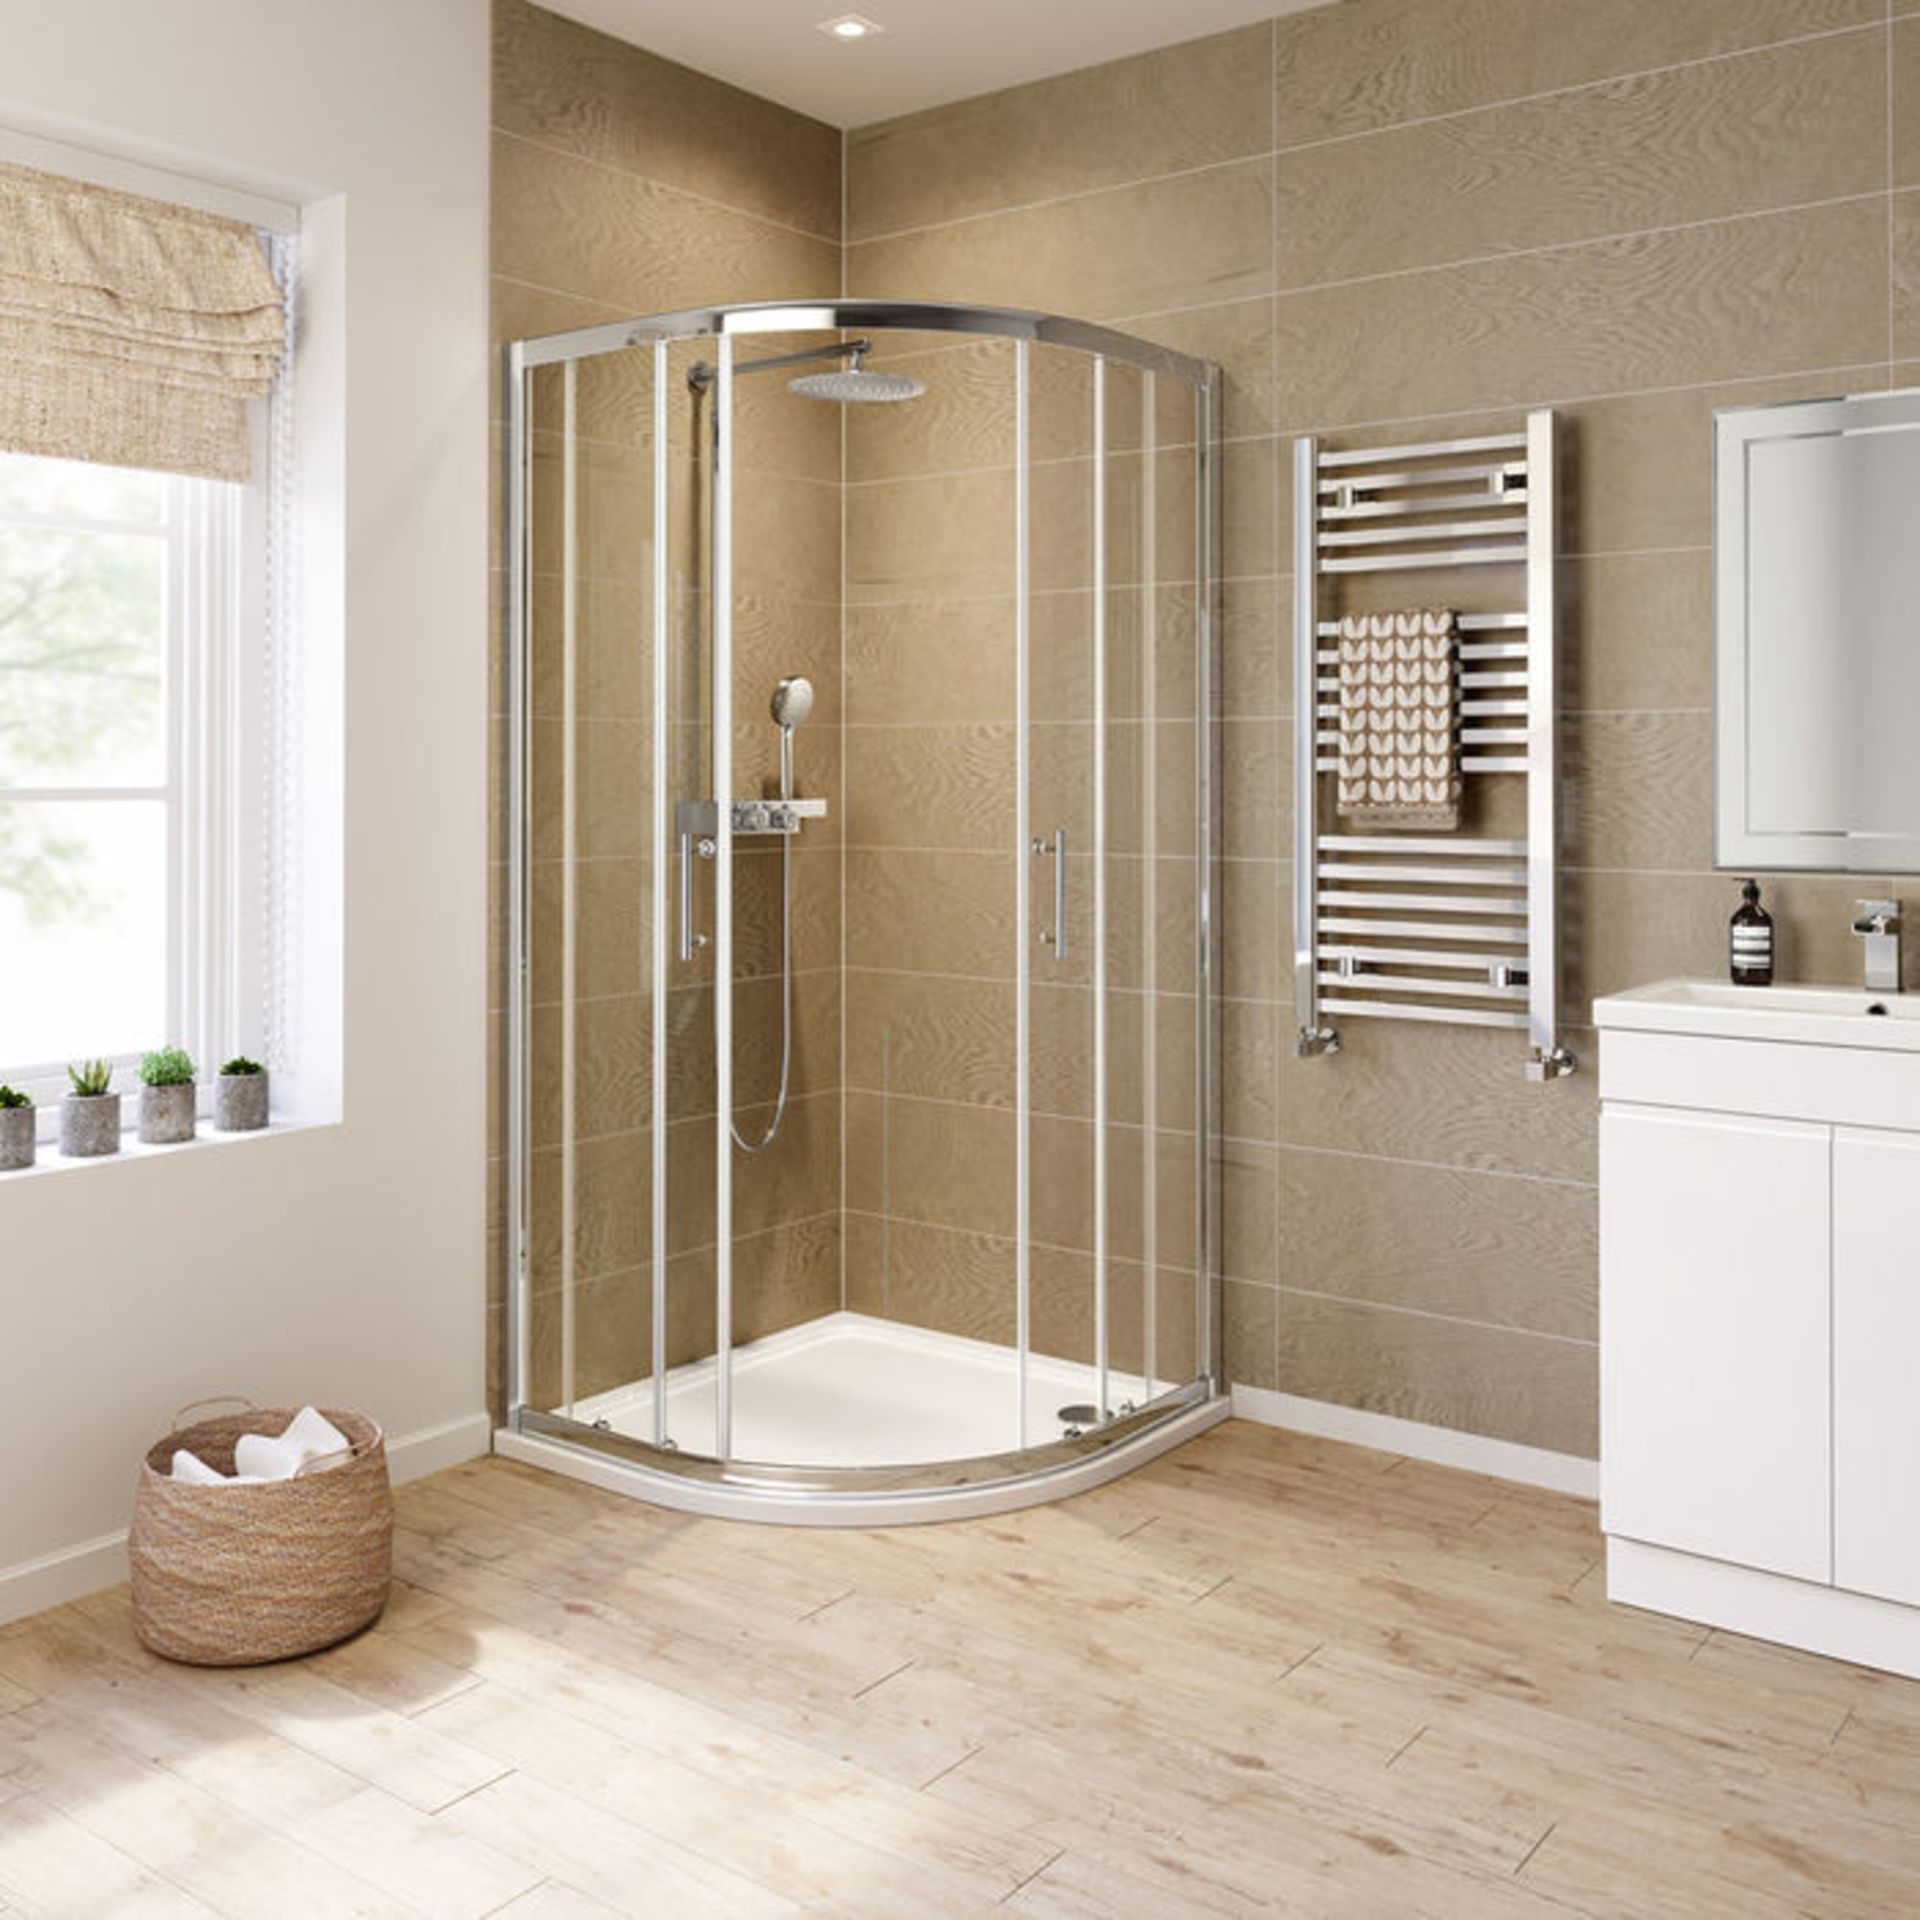 (YC60) NEW 900x900mm - 6mm - Elements Quadrant Shower Enclosure. RRP £293.99. 6mm Safety Glass... - Image 3 of 3